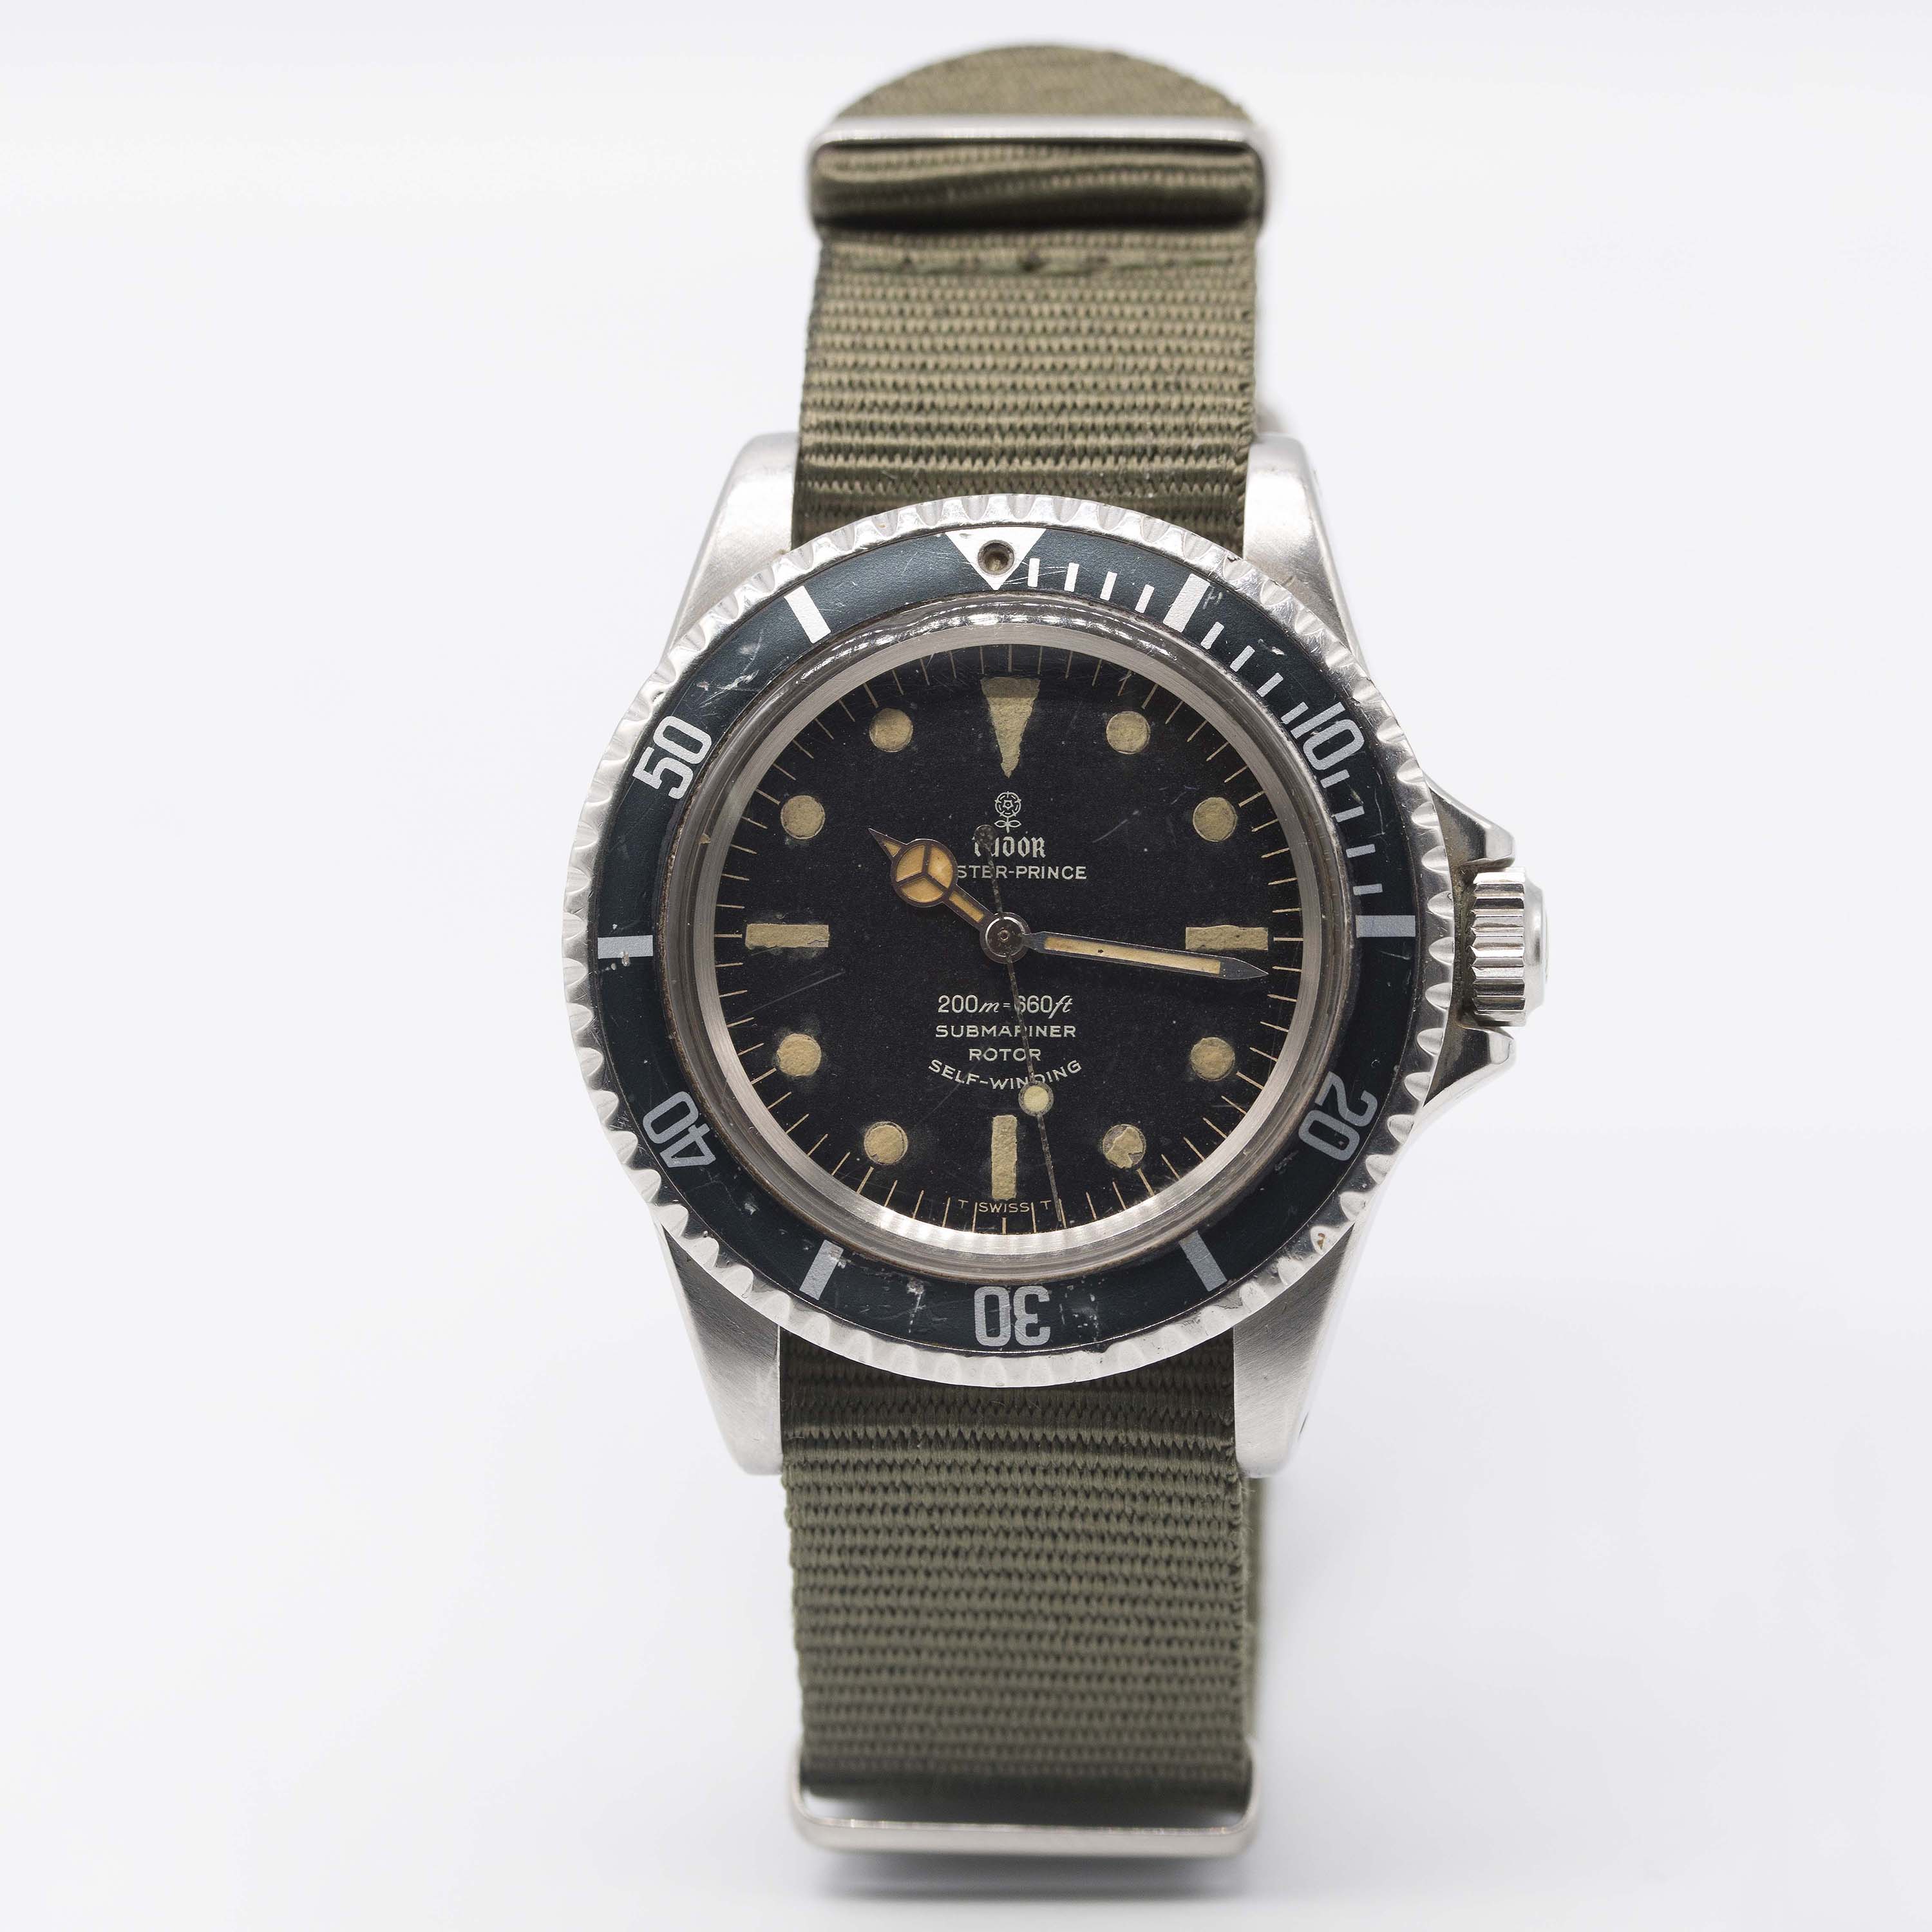 A GENTLEMAN'S STAINLESS STEEL ROLEX TUDOR OYSTER PRINCE SUBMARINER WRIST WATCH CIRCA 1967, REF. - Image 2 of 10